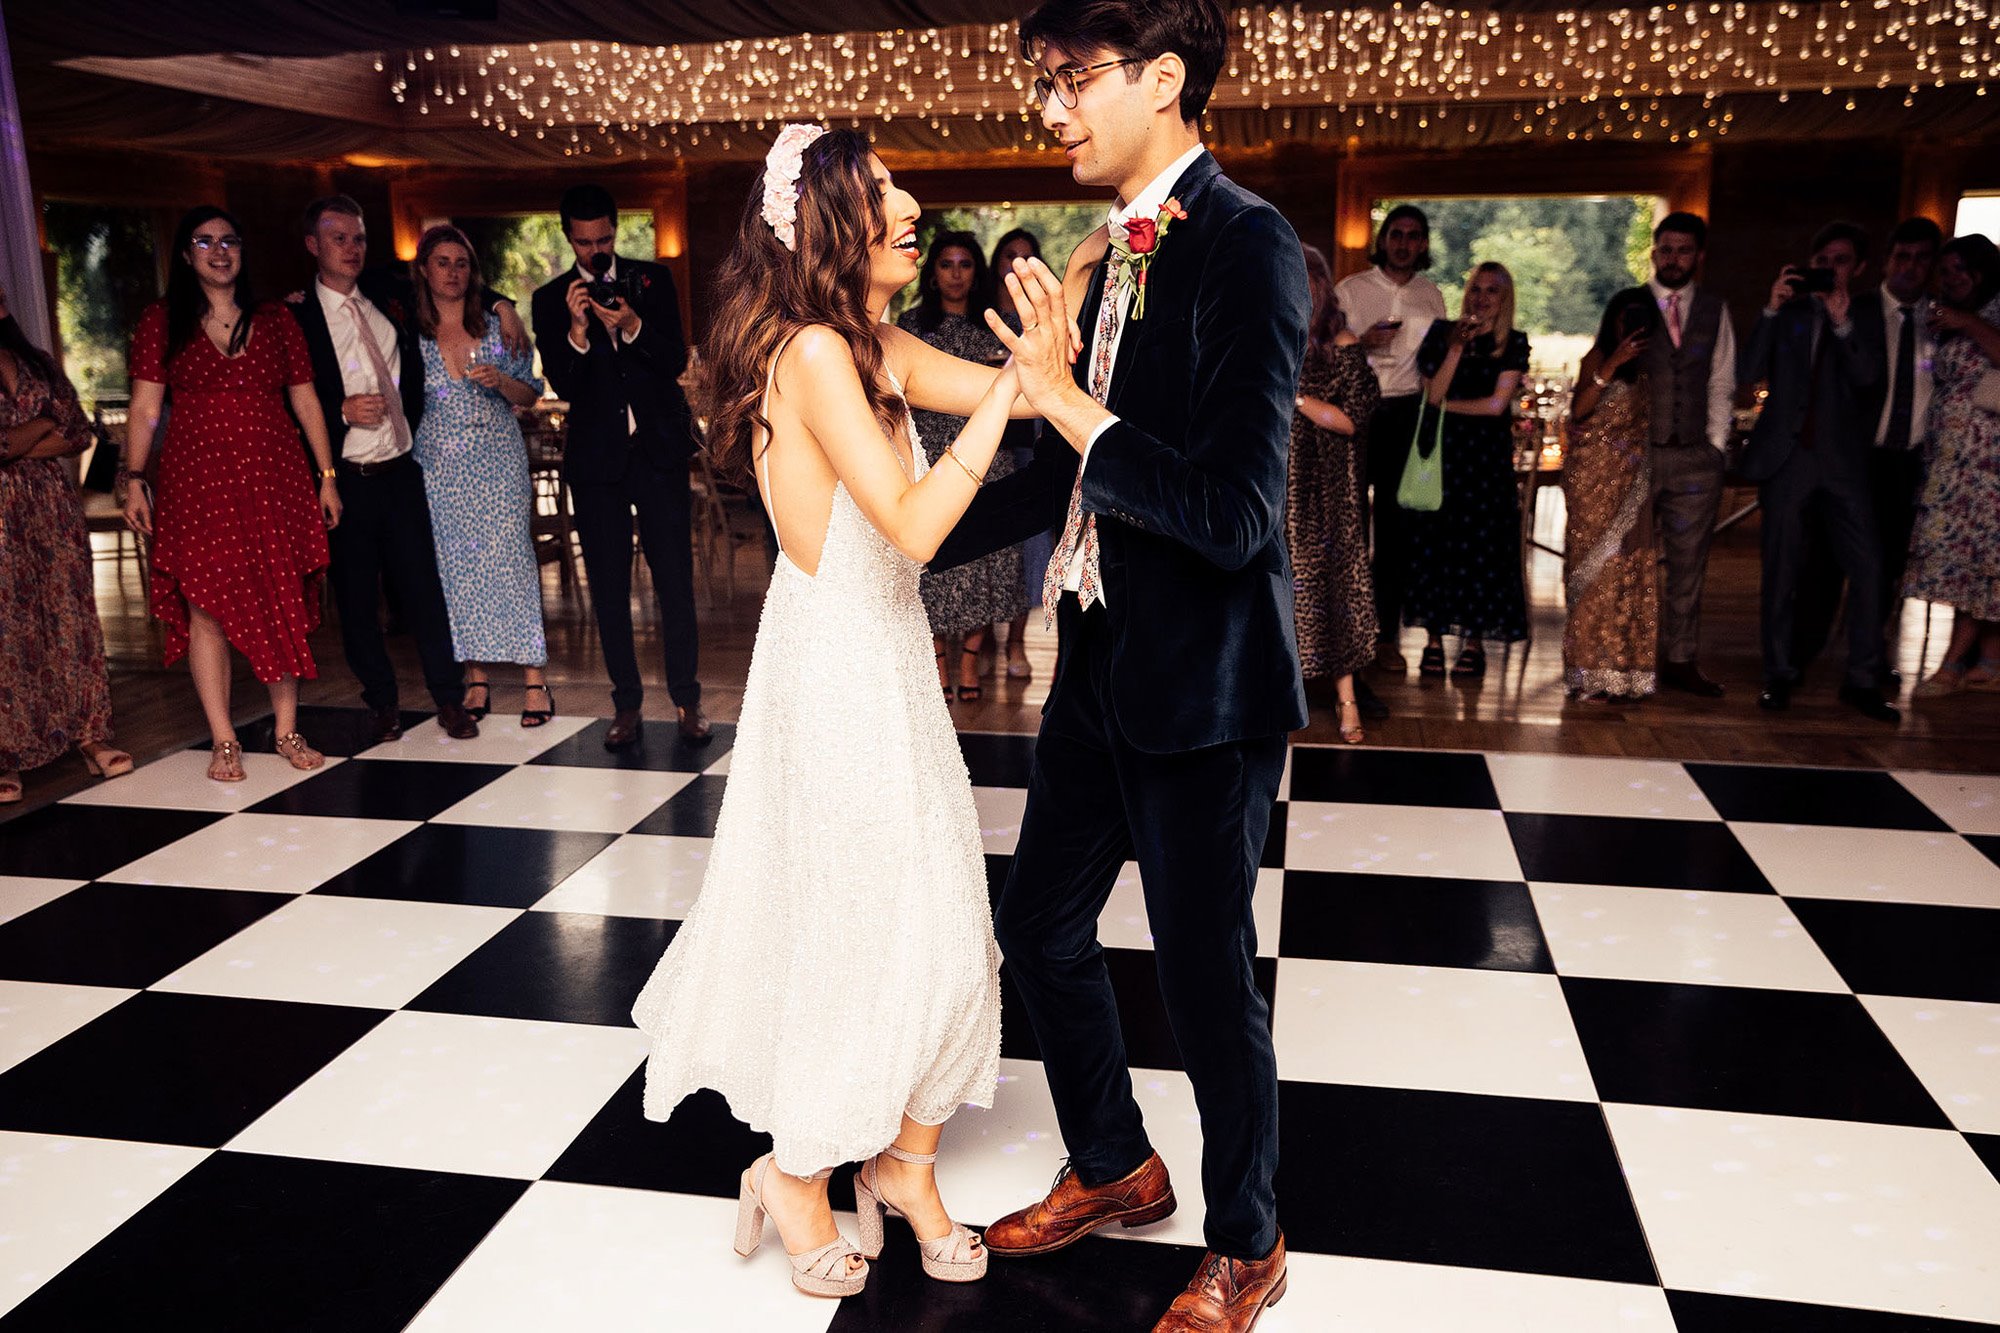 Modern bride wearing pearl reception dress and groom in blue velvet suit dance on chequered dance floor with twinkling lights above